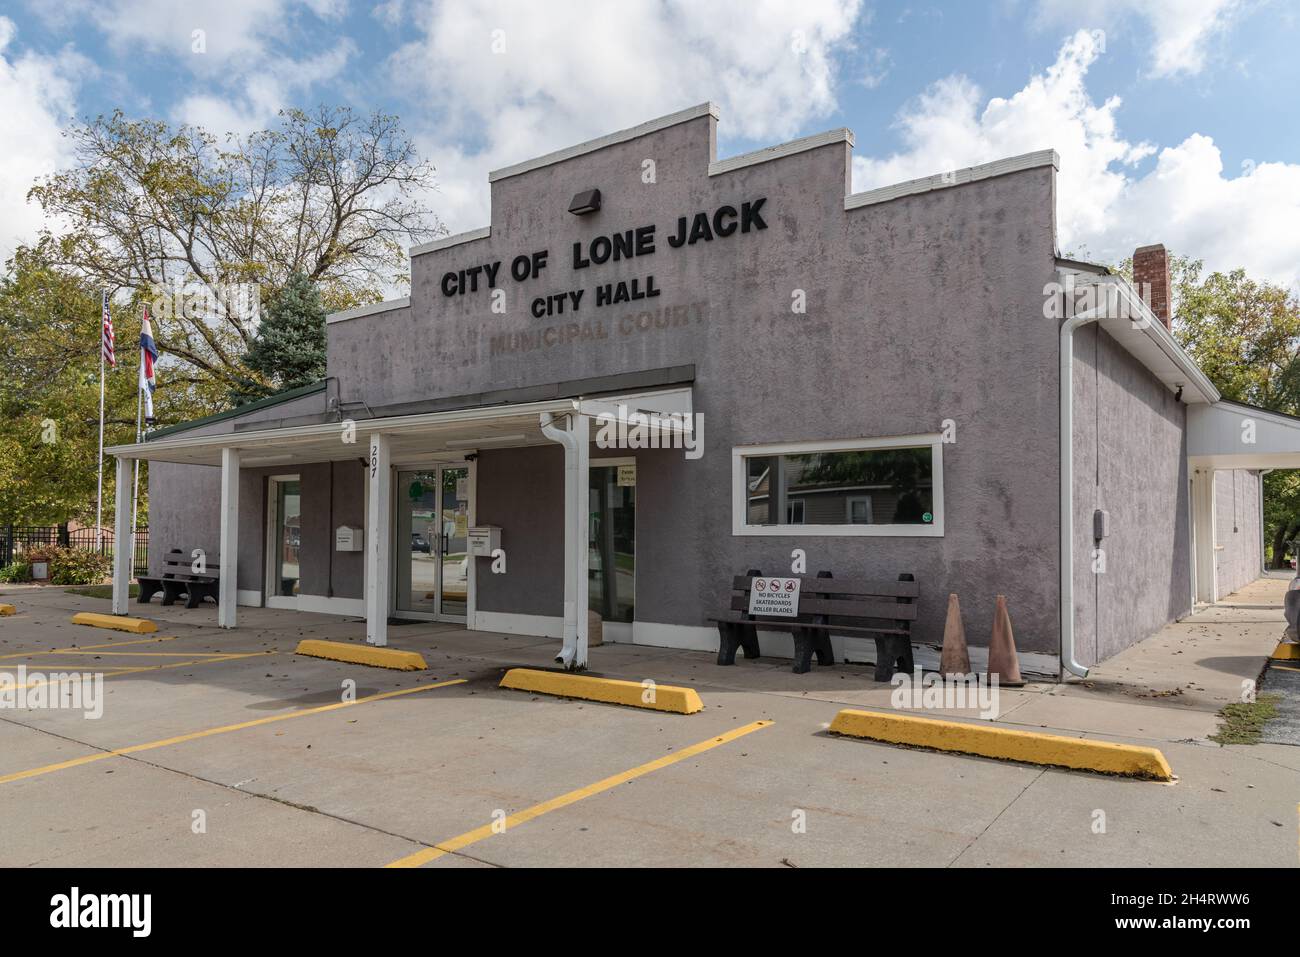 Exterior of the City of Lone Jack City Hall, a grey one story building with a western style false front and shed roof, Lone Jack, Missouri. Stock Photo